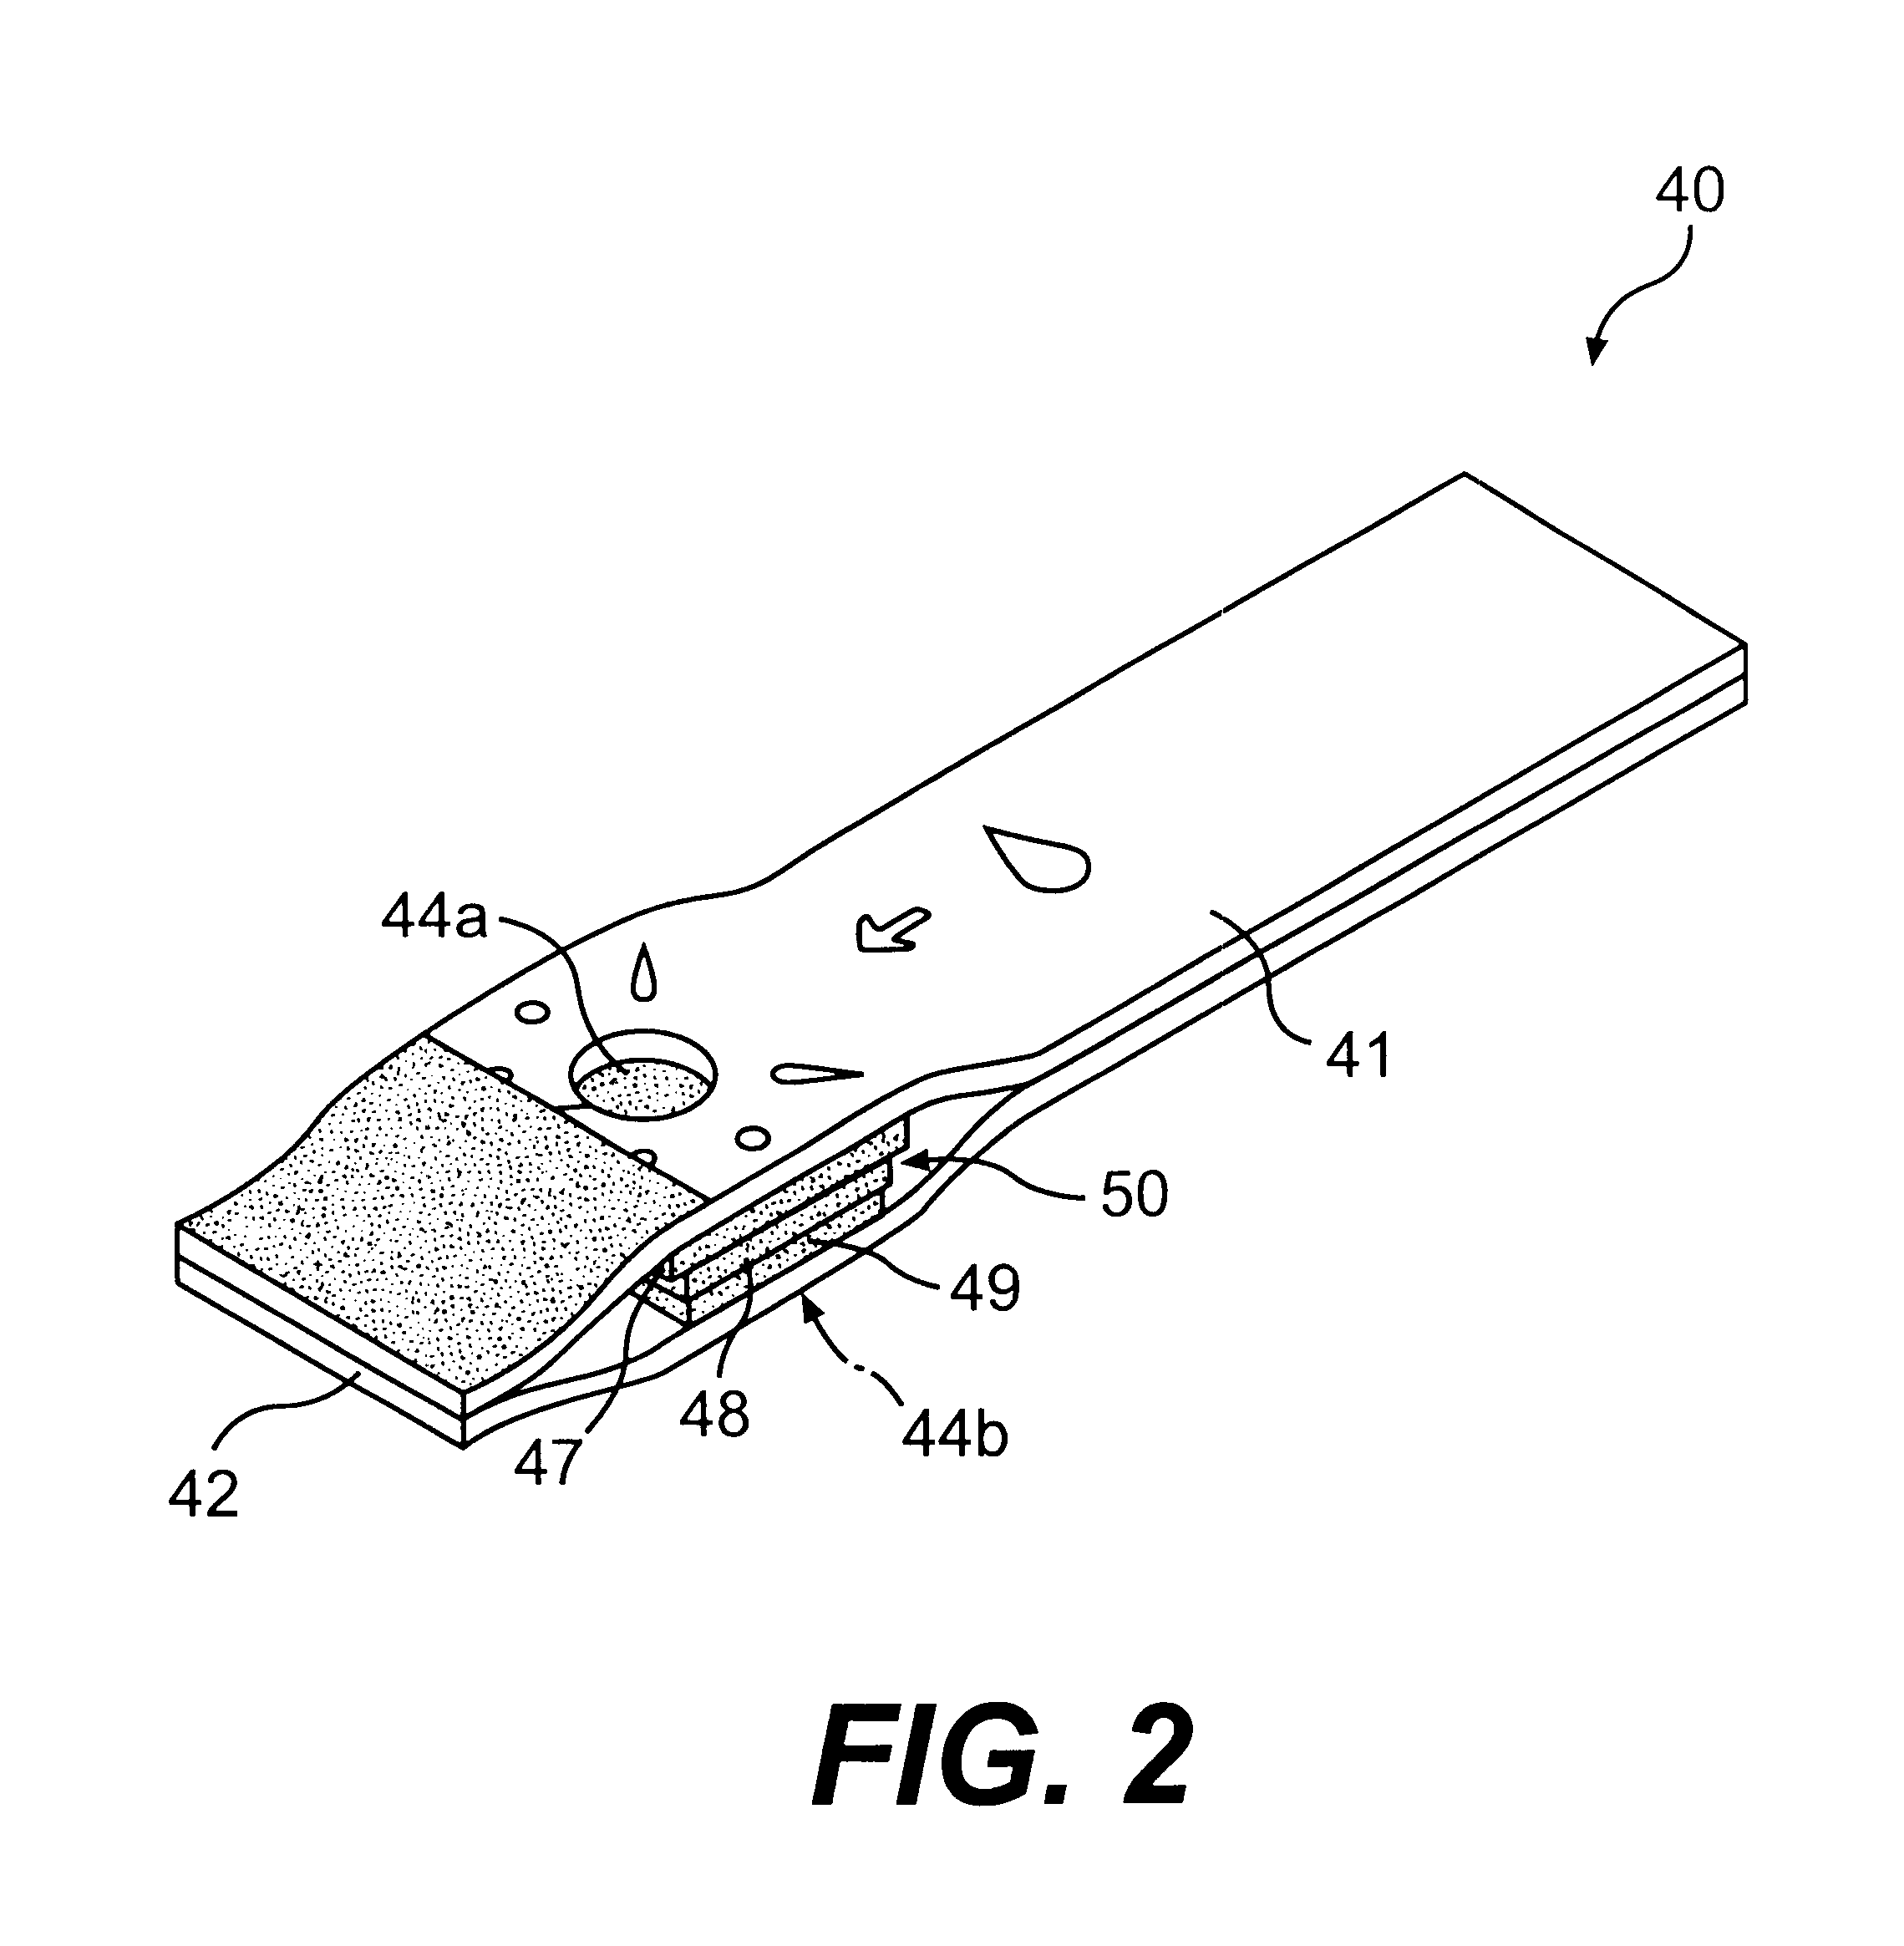 Method for determining concentration of an analyte in a test strip